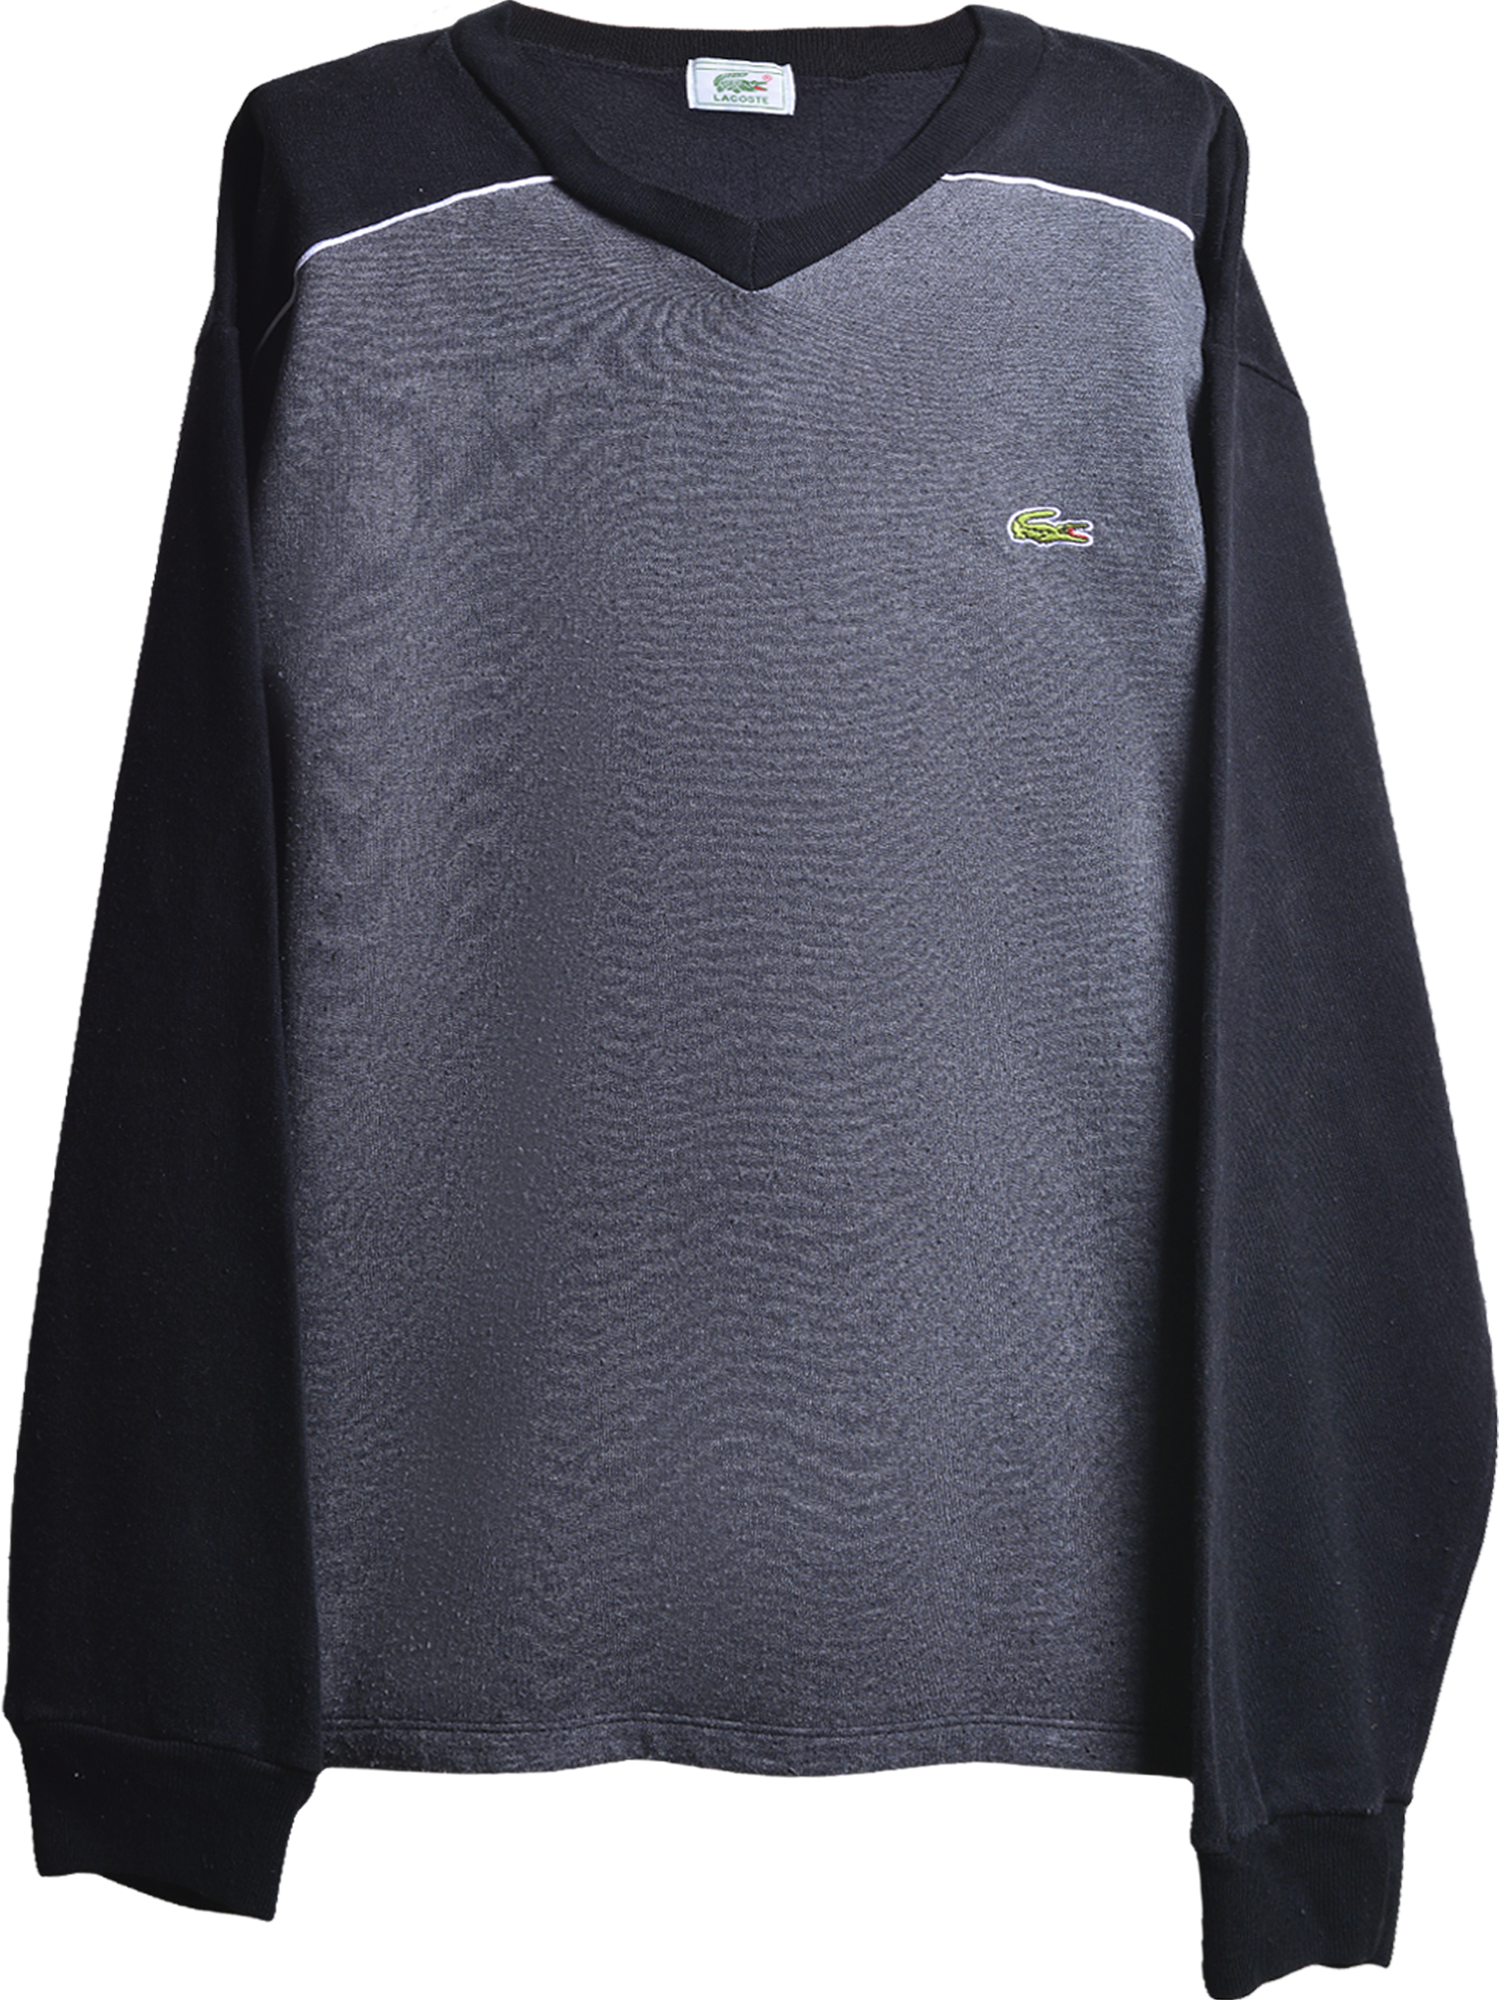 Lacoste Woll Pullover bunt